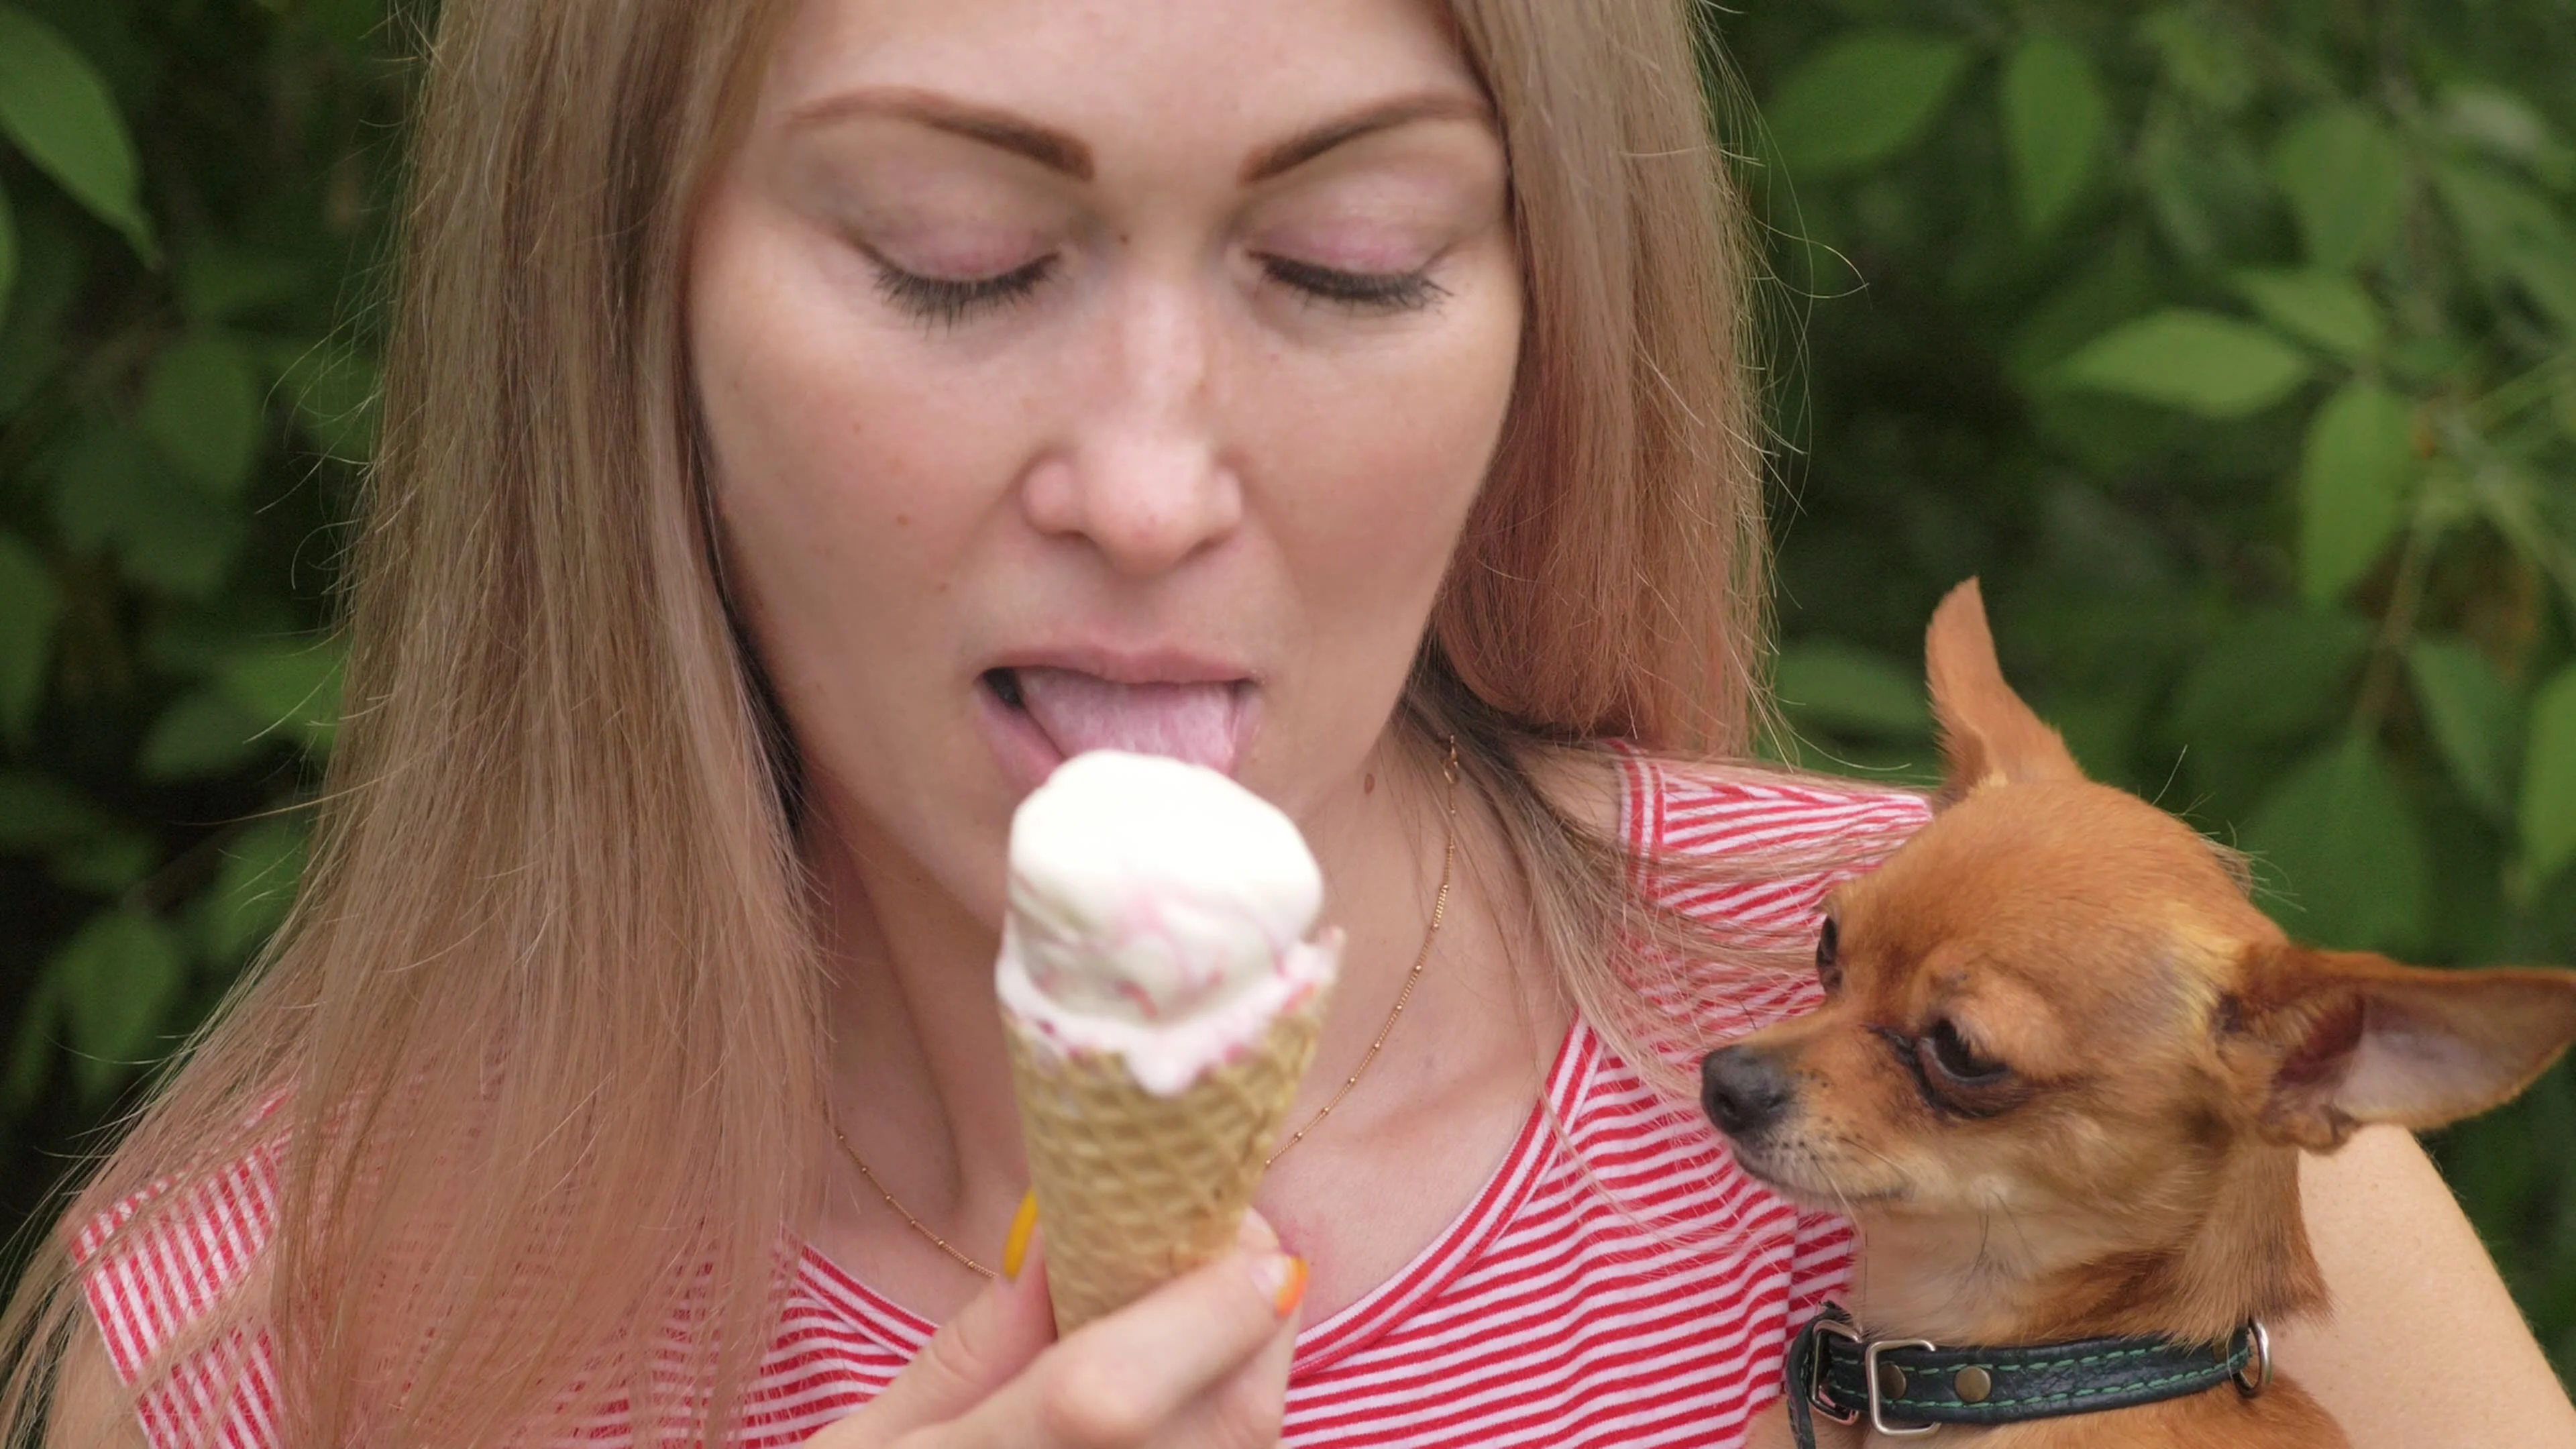 can dogs lick ice cream